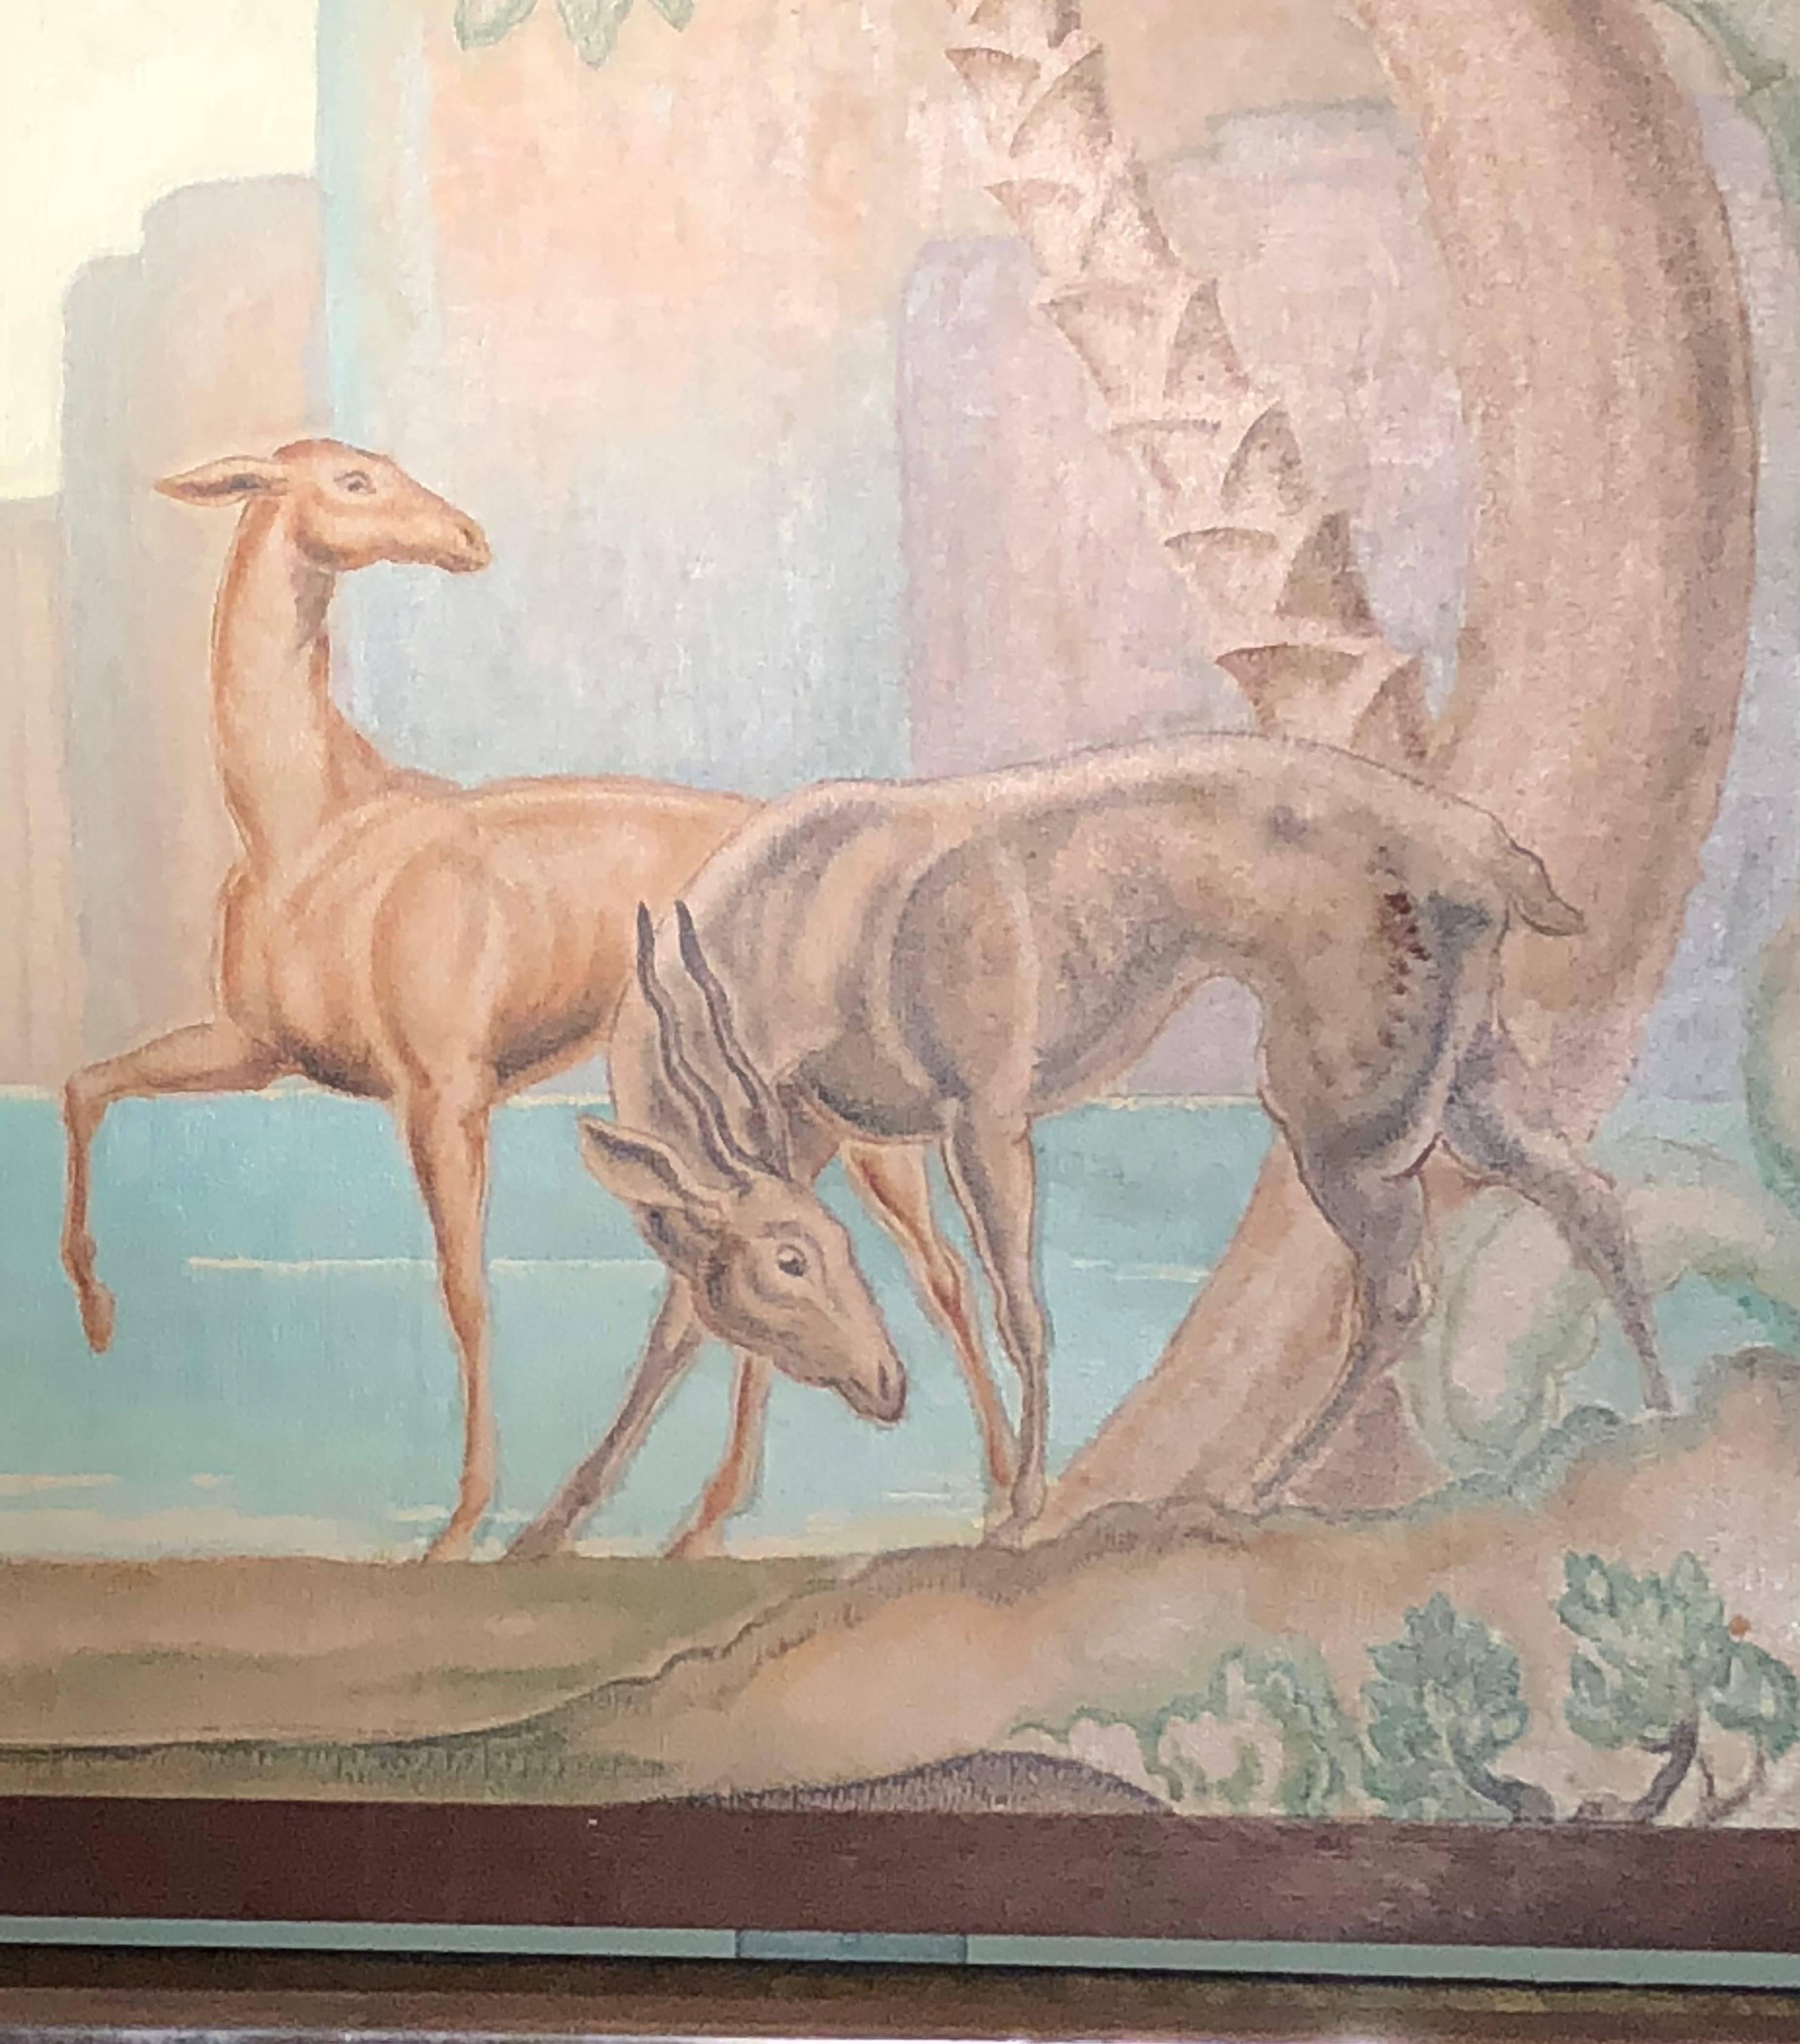 In the style of Jean Dupas, this original stunning Art Deco painting – mural was purchased in Bordeaux, France the town where Dupas lived and worked. We feel certain that this was painted by a colleague, student or Dupas himself. Jean Dupas is one